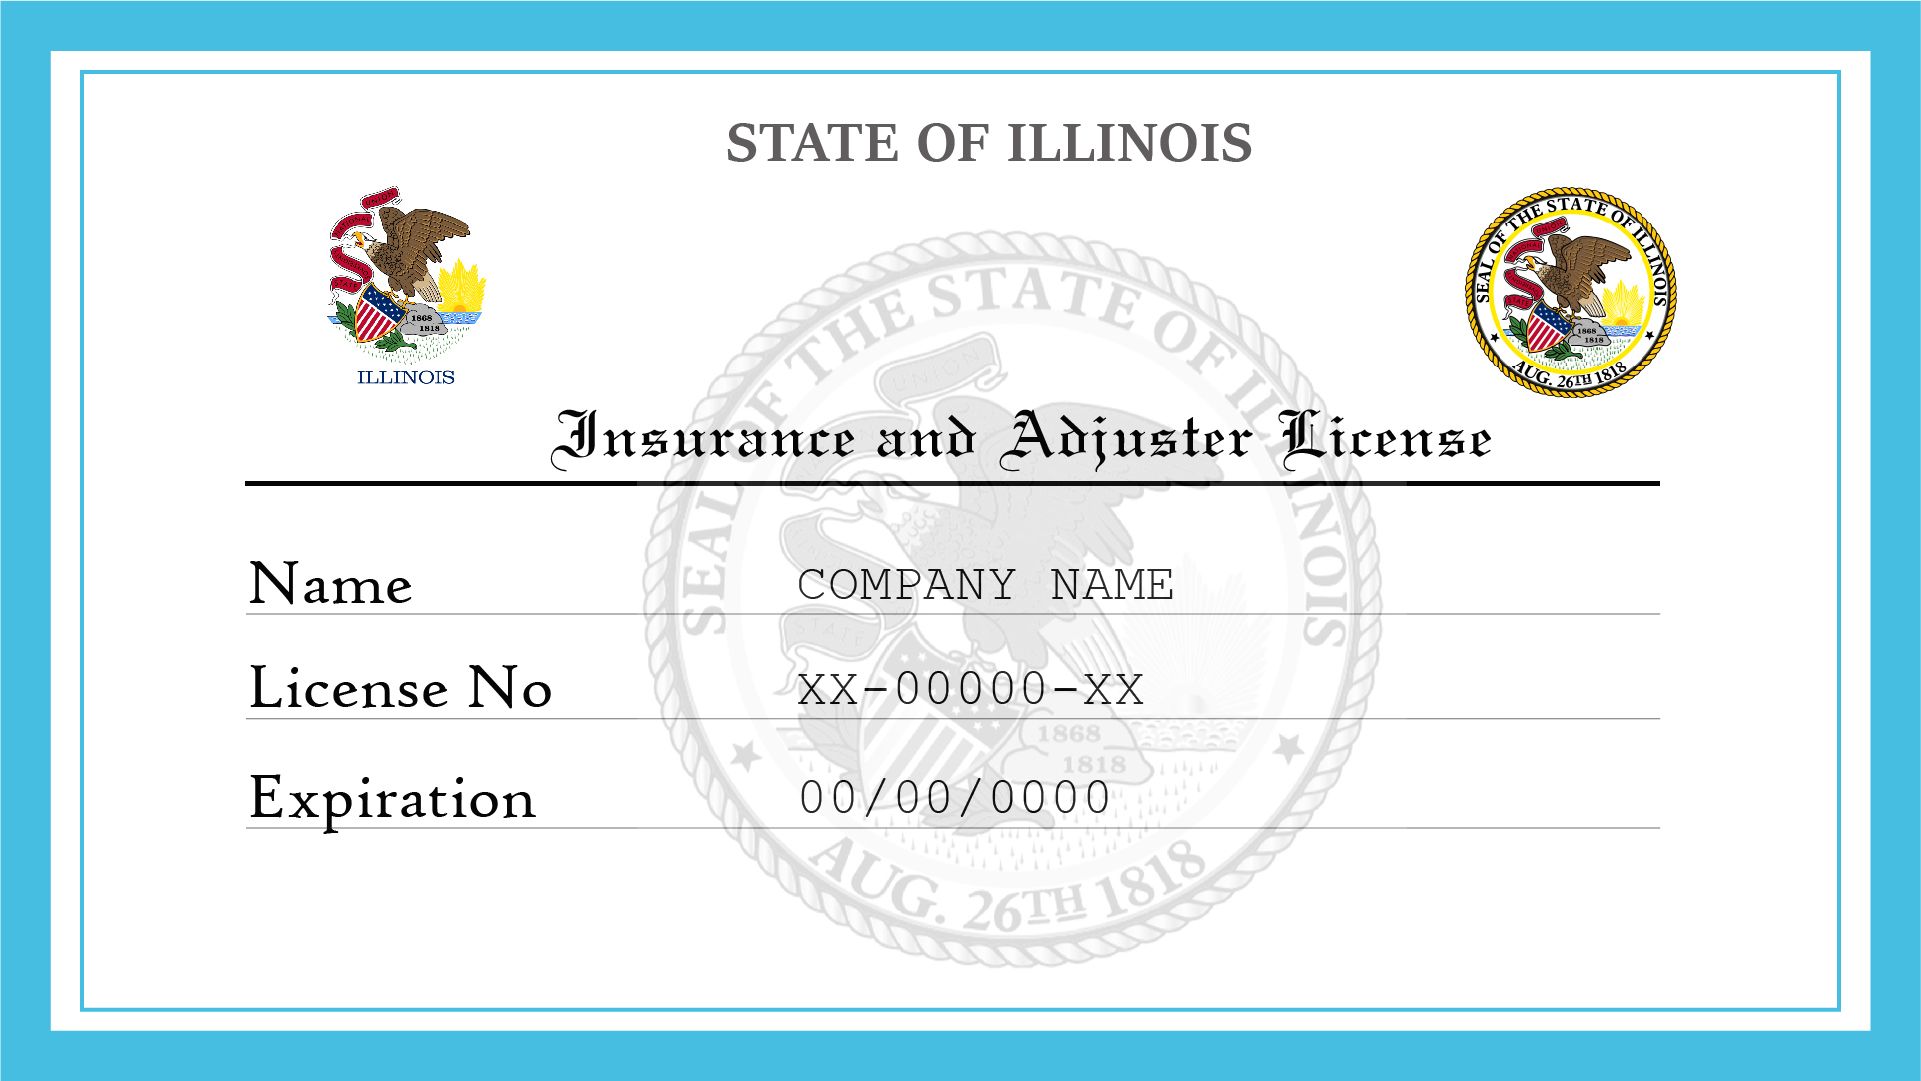 illinois-insurance-and-adjuster-license-license-lookup